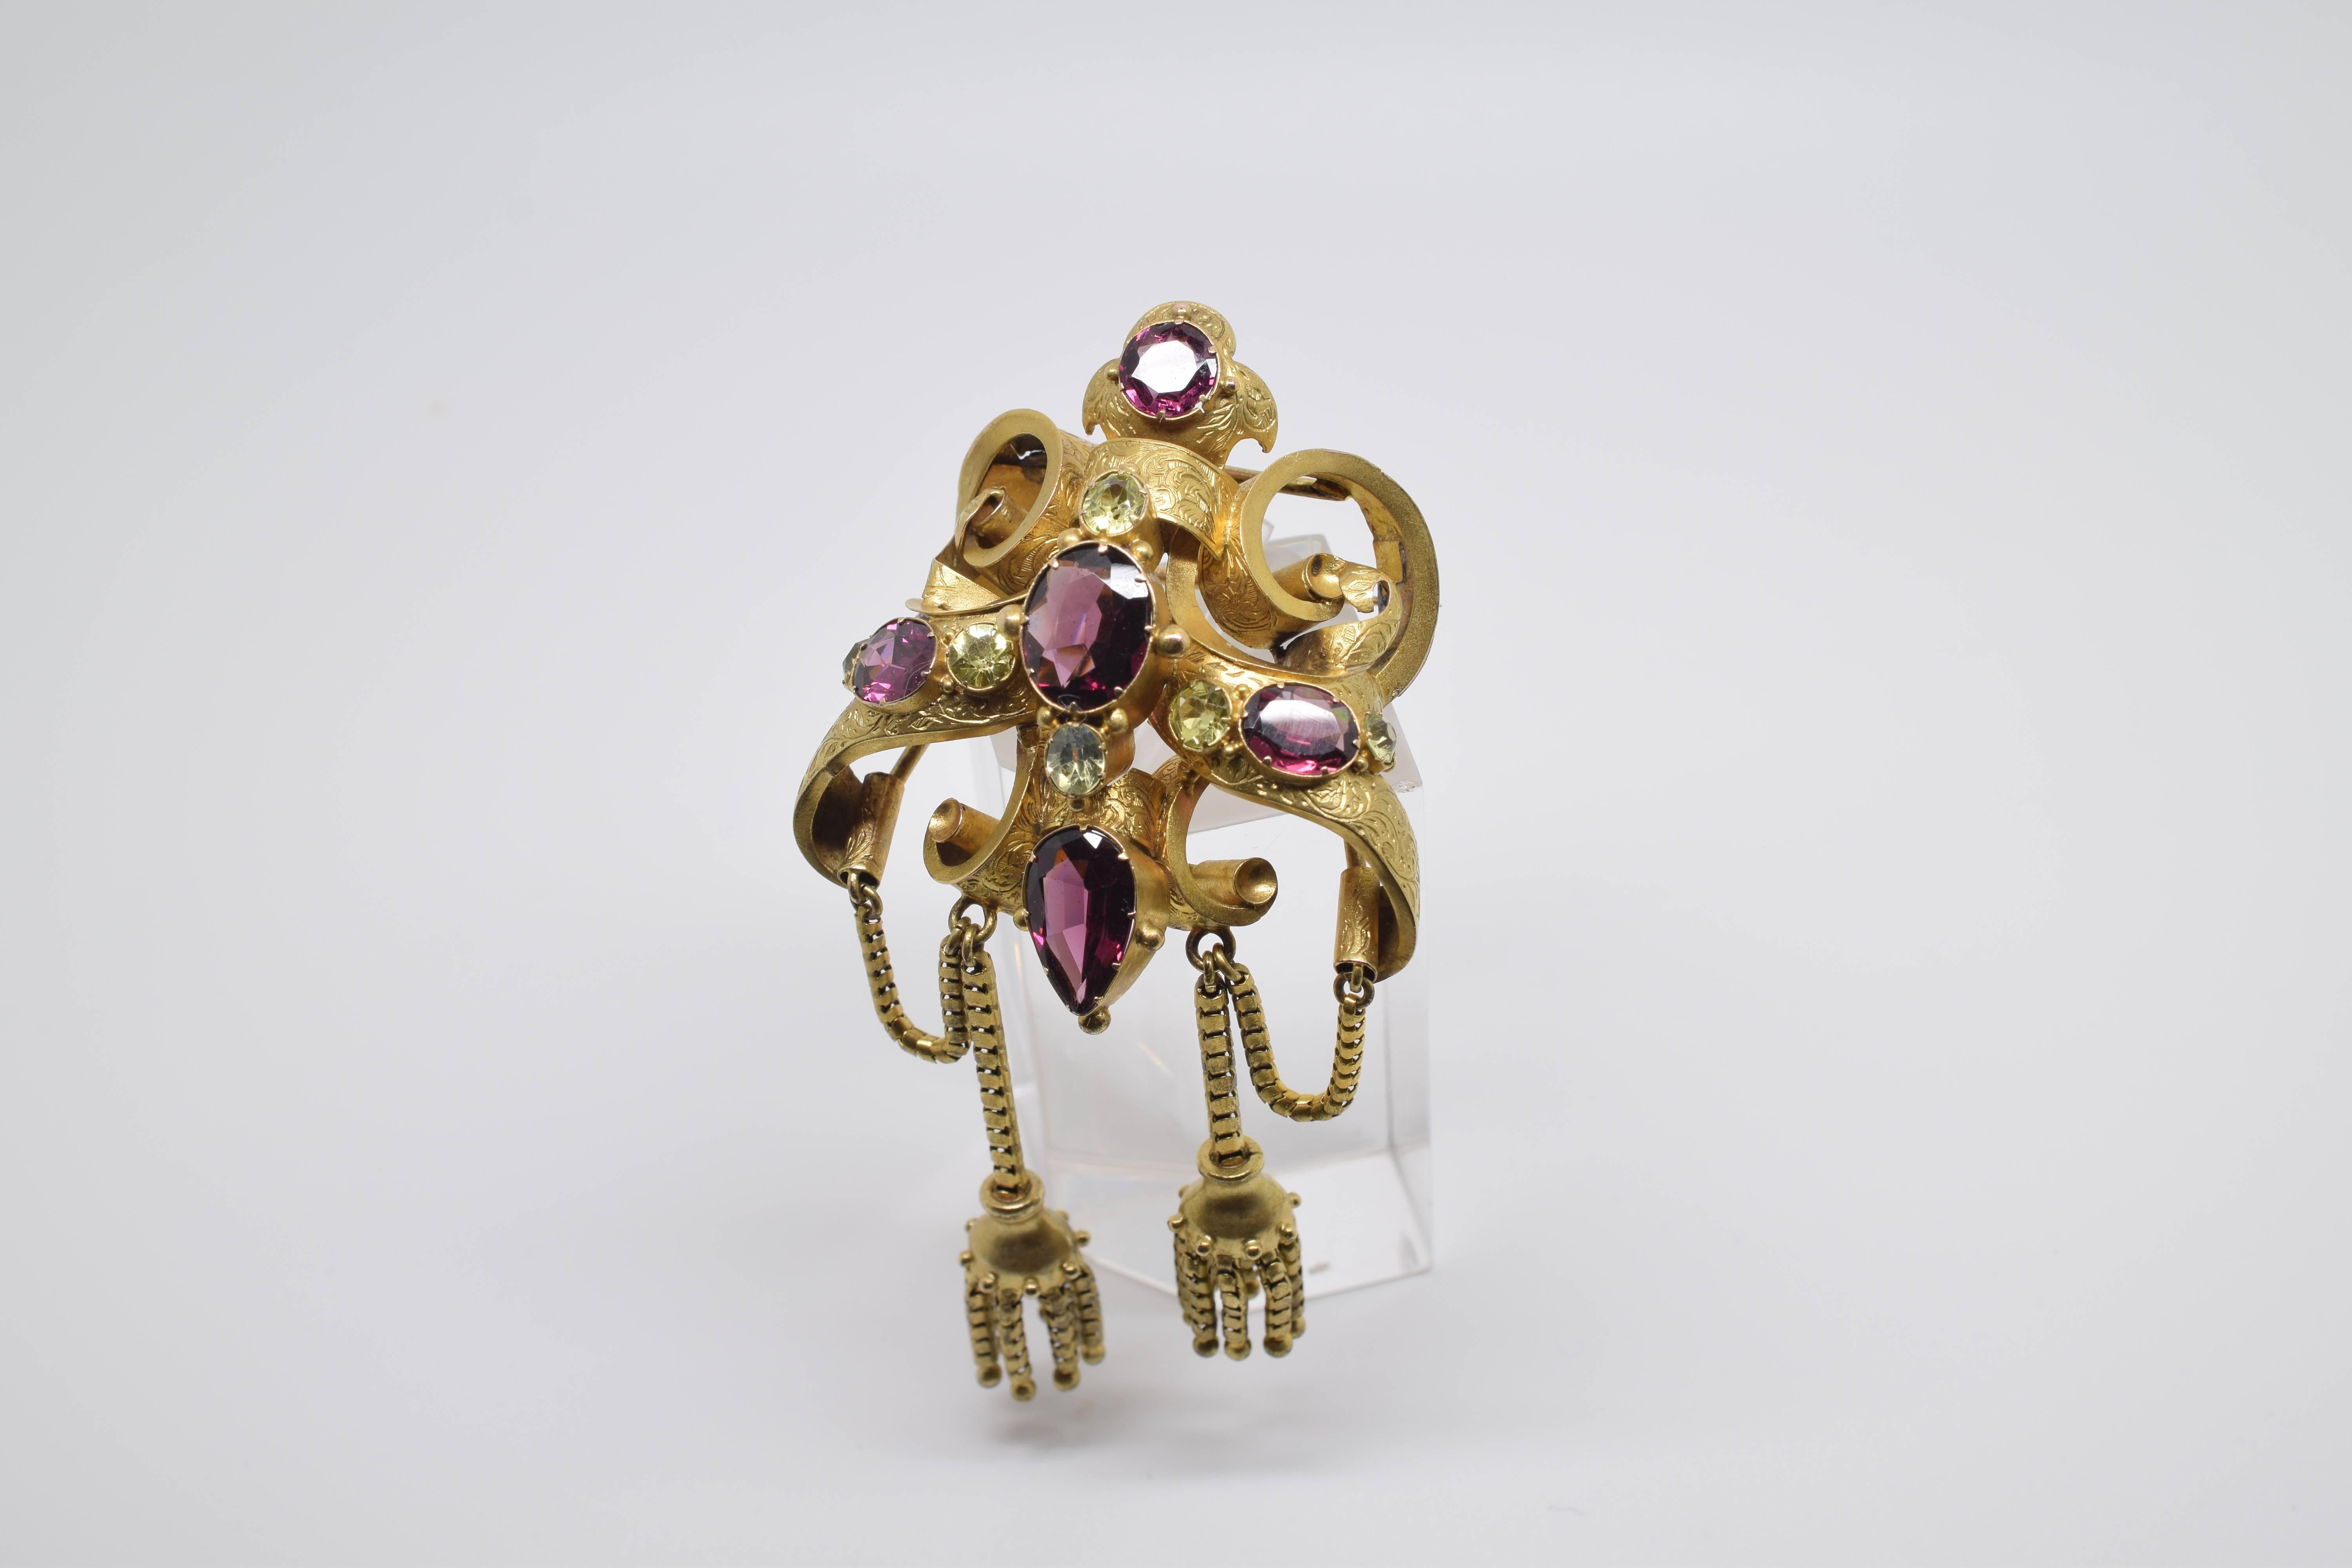 Neoclassical Revival 18kt Gold Brooch with Garnets, Possibly, 19th Century For Sale